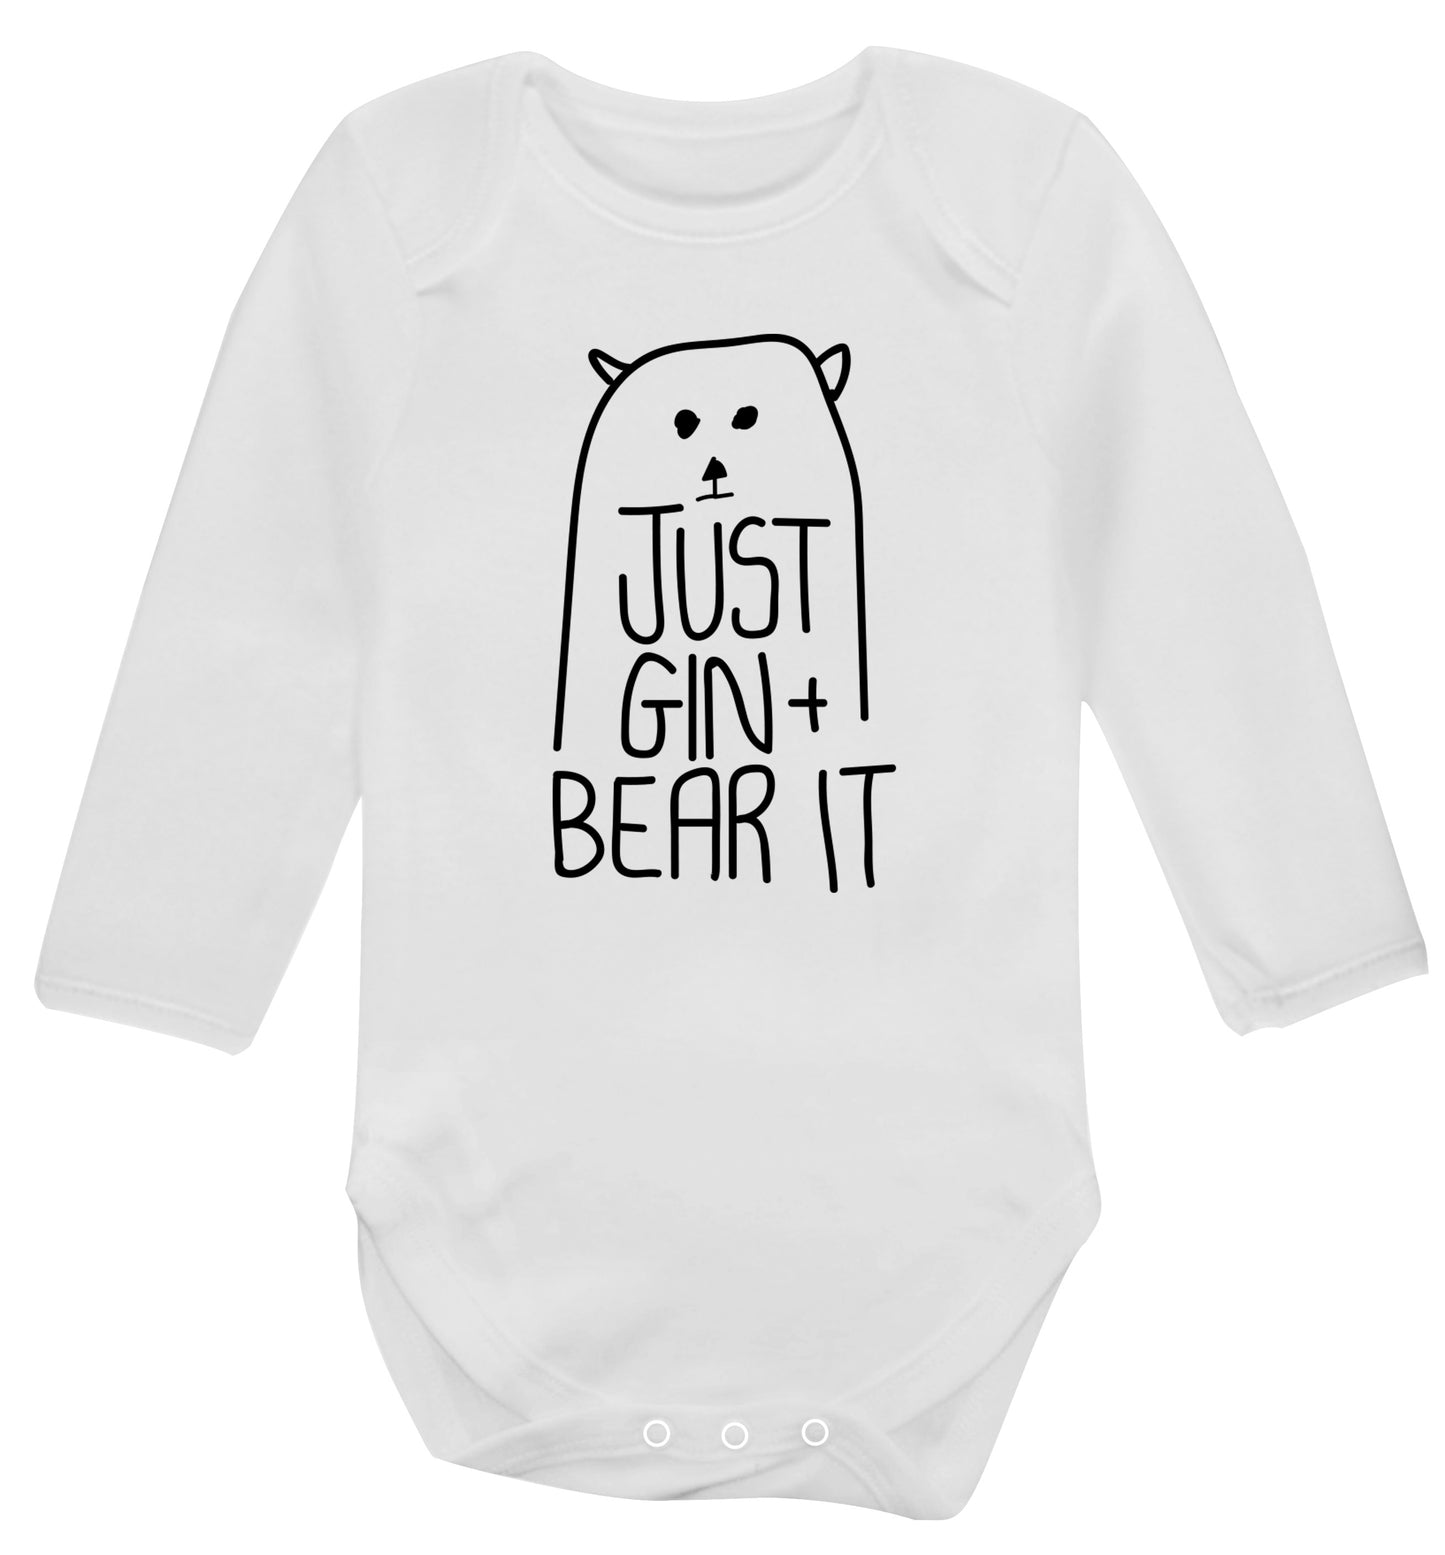 Just gin and bear it Baby Vest long sleeved white 6-12 months